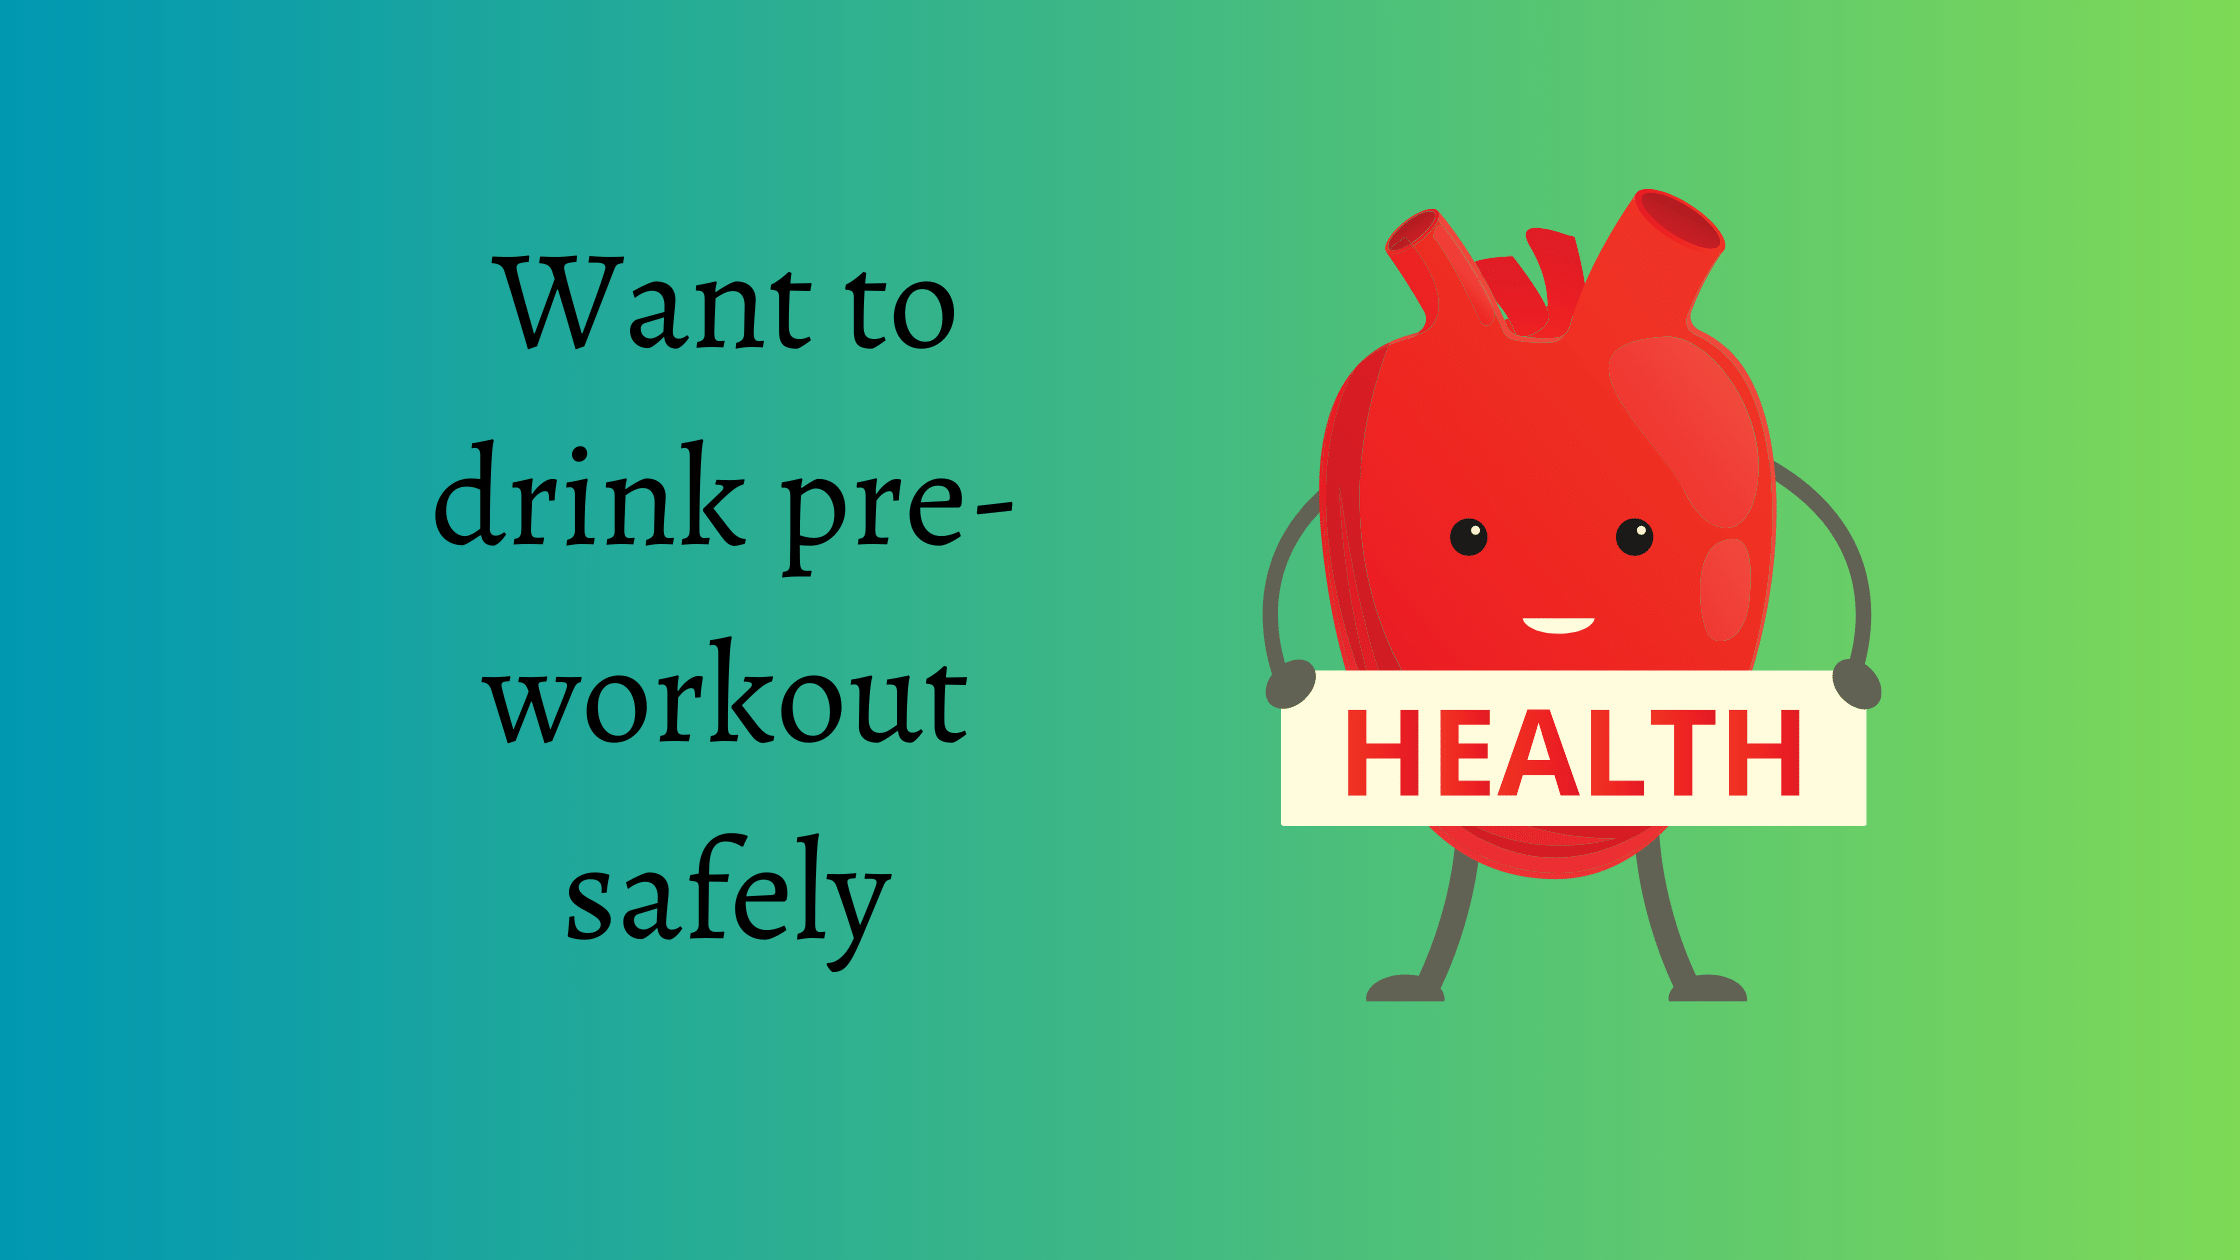 drink pre-workout safely